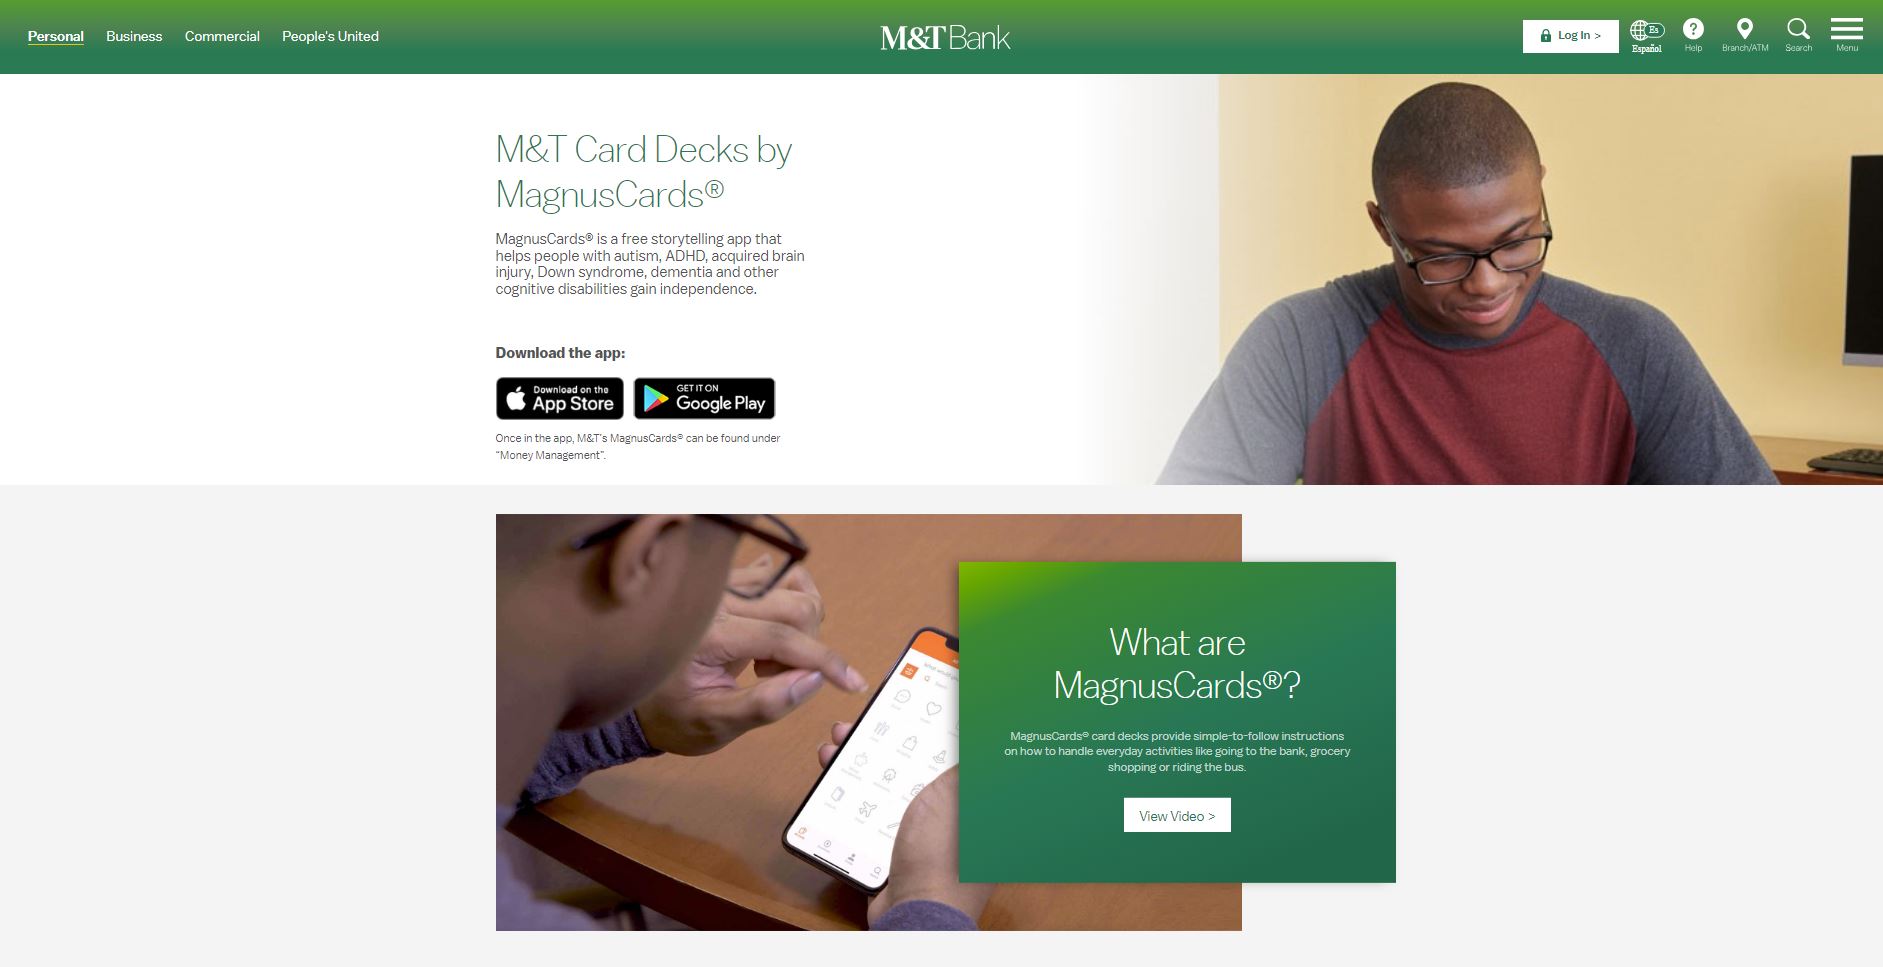 MagnusCards featured on the M&T Bank website.